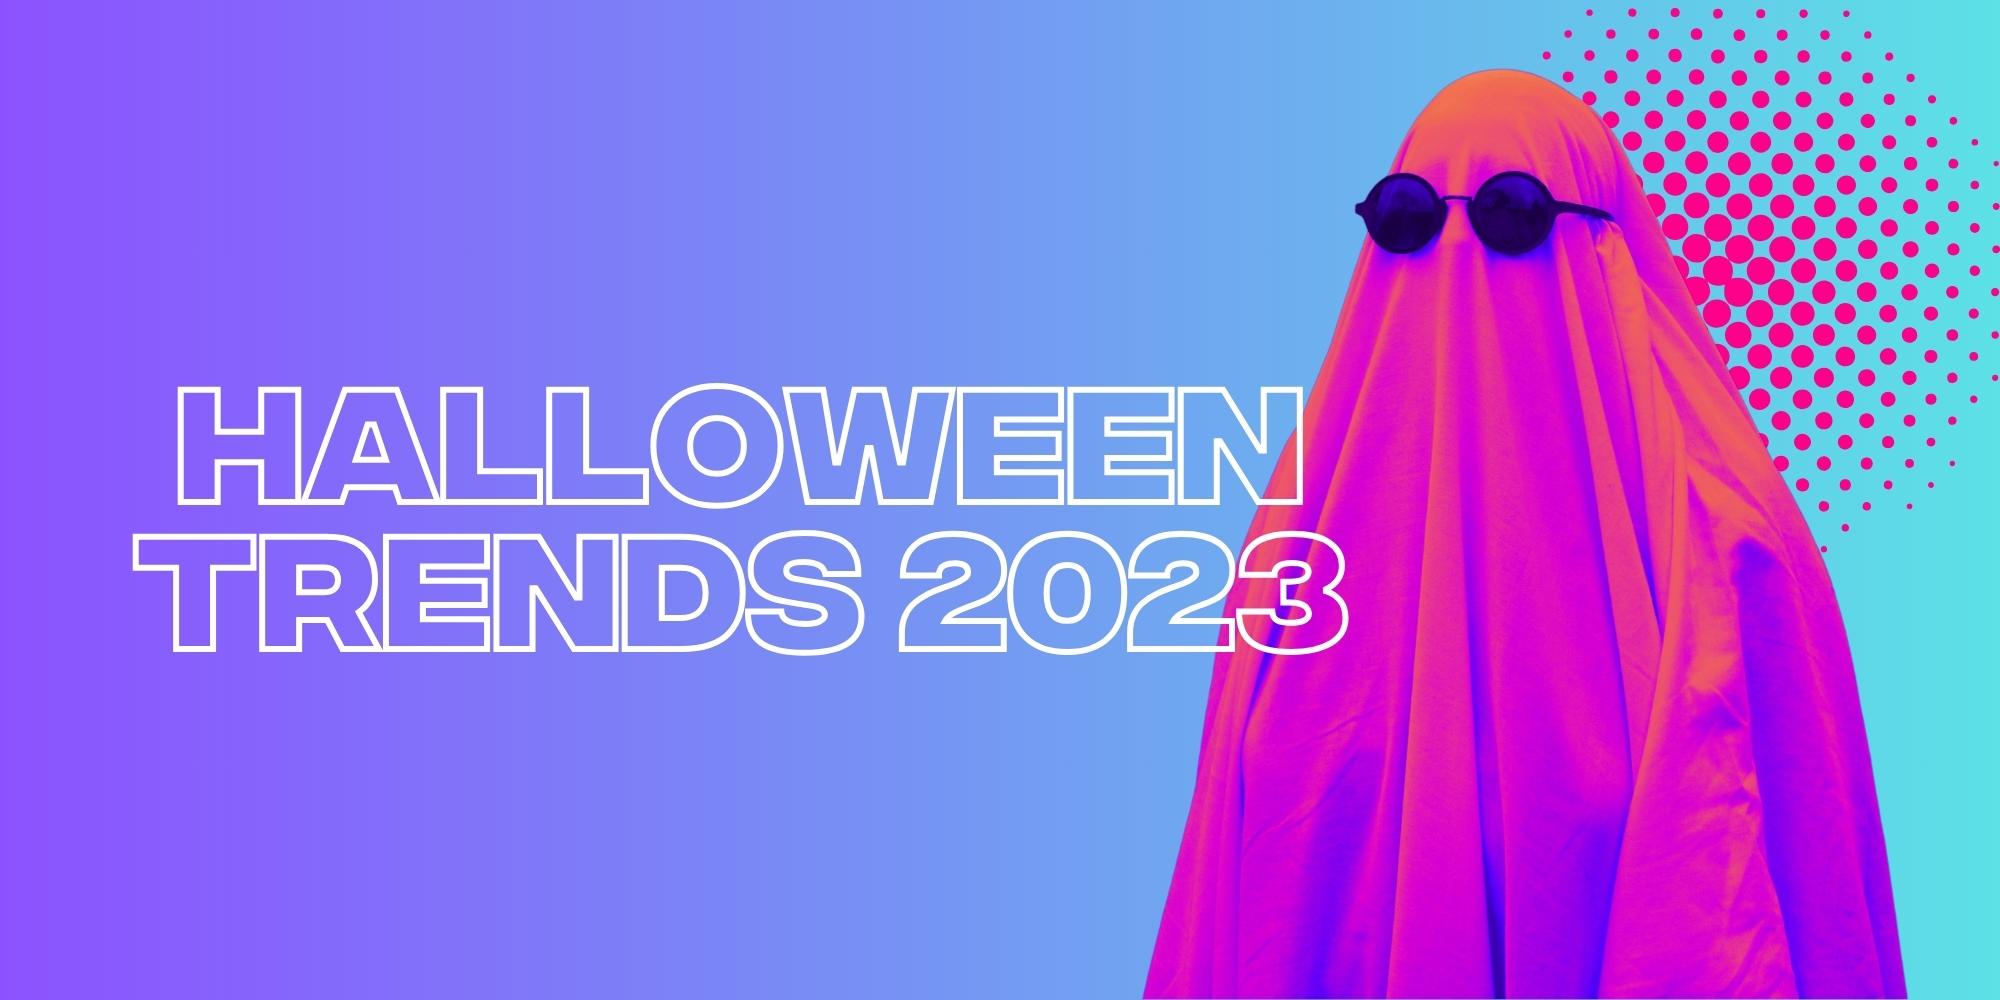 Halloween Trends To Start Your 2023 Spooky Season Right